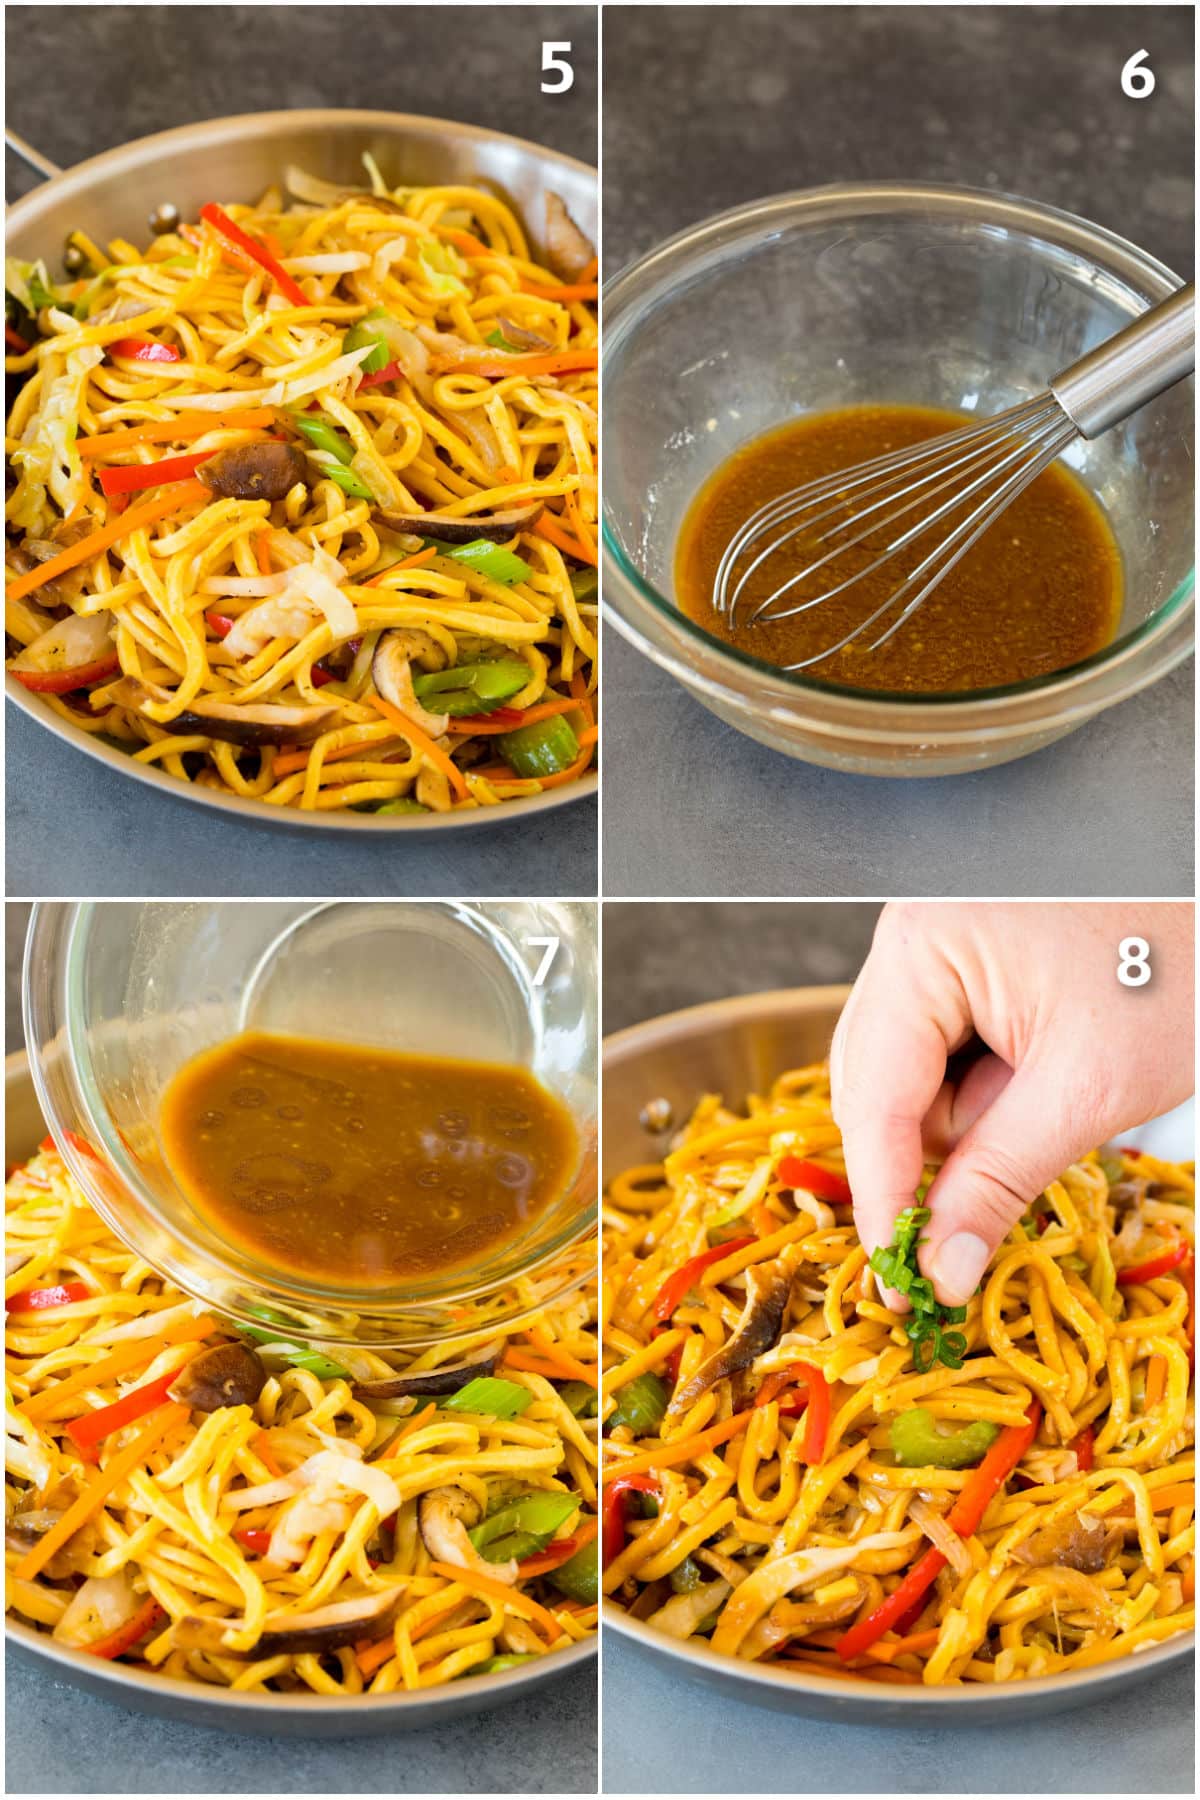 Process shots showing how to make veggie lo mein.